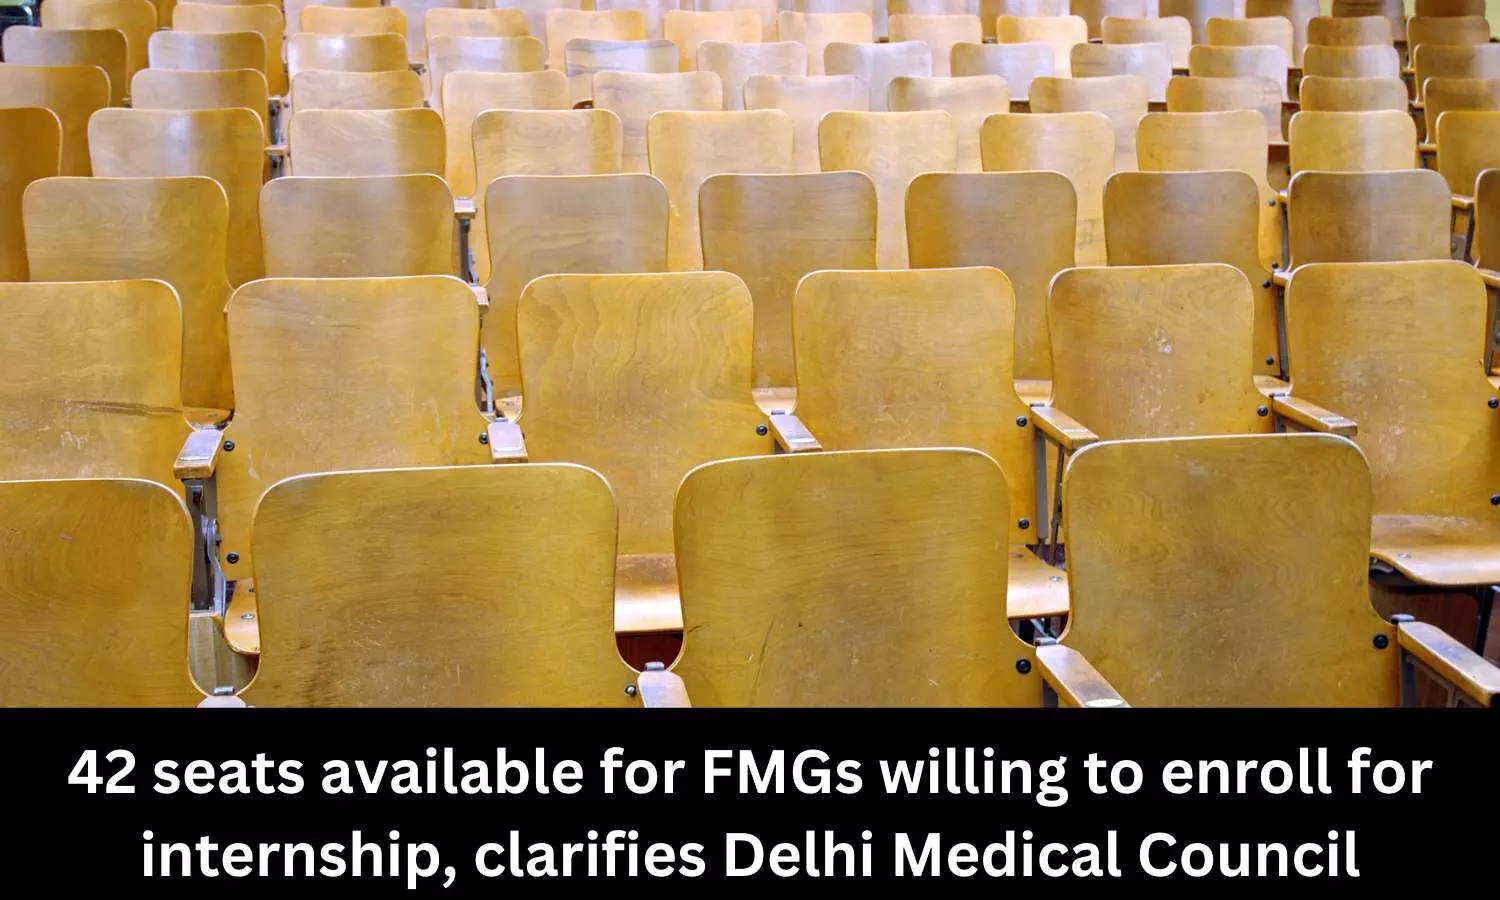 42 seats available for FMGs willing to enroll for internship: Delhi Medical Council